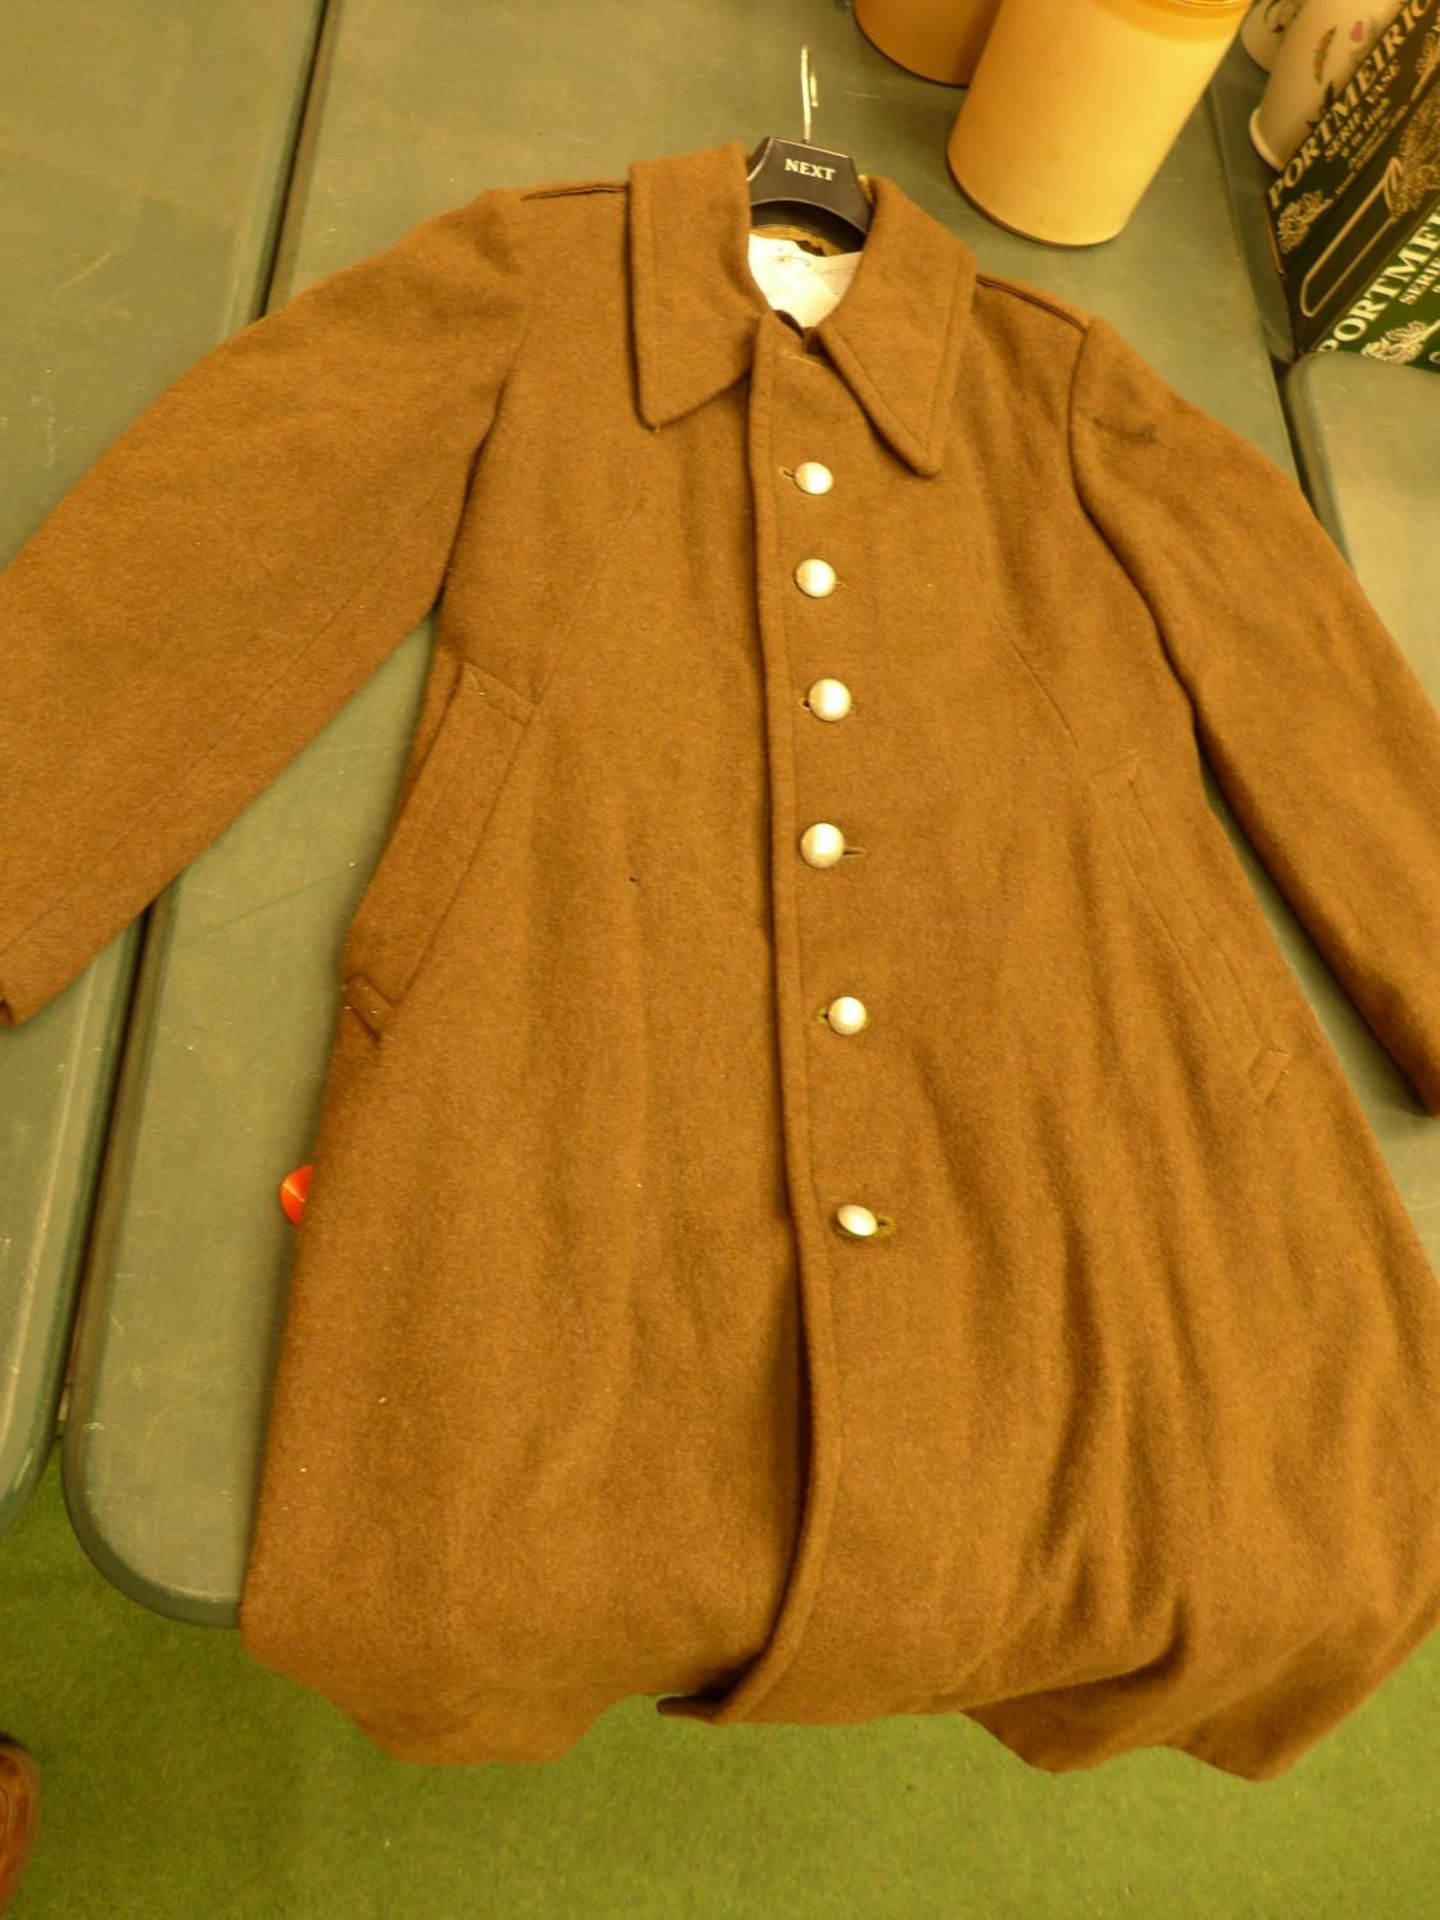 A FRENCH ARMY TUNIC AND A FRENCH ARMY GREAT COAT, SIZE 38-40" CHEST, 18" ARMPITS TO CUFF - Image 4 of 8